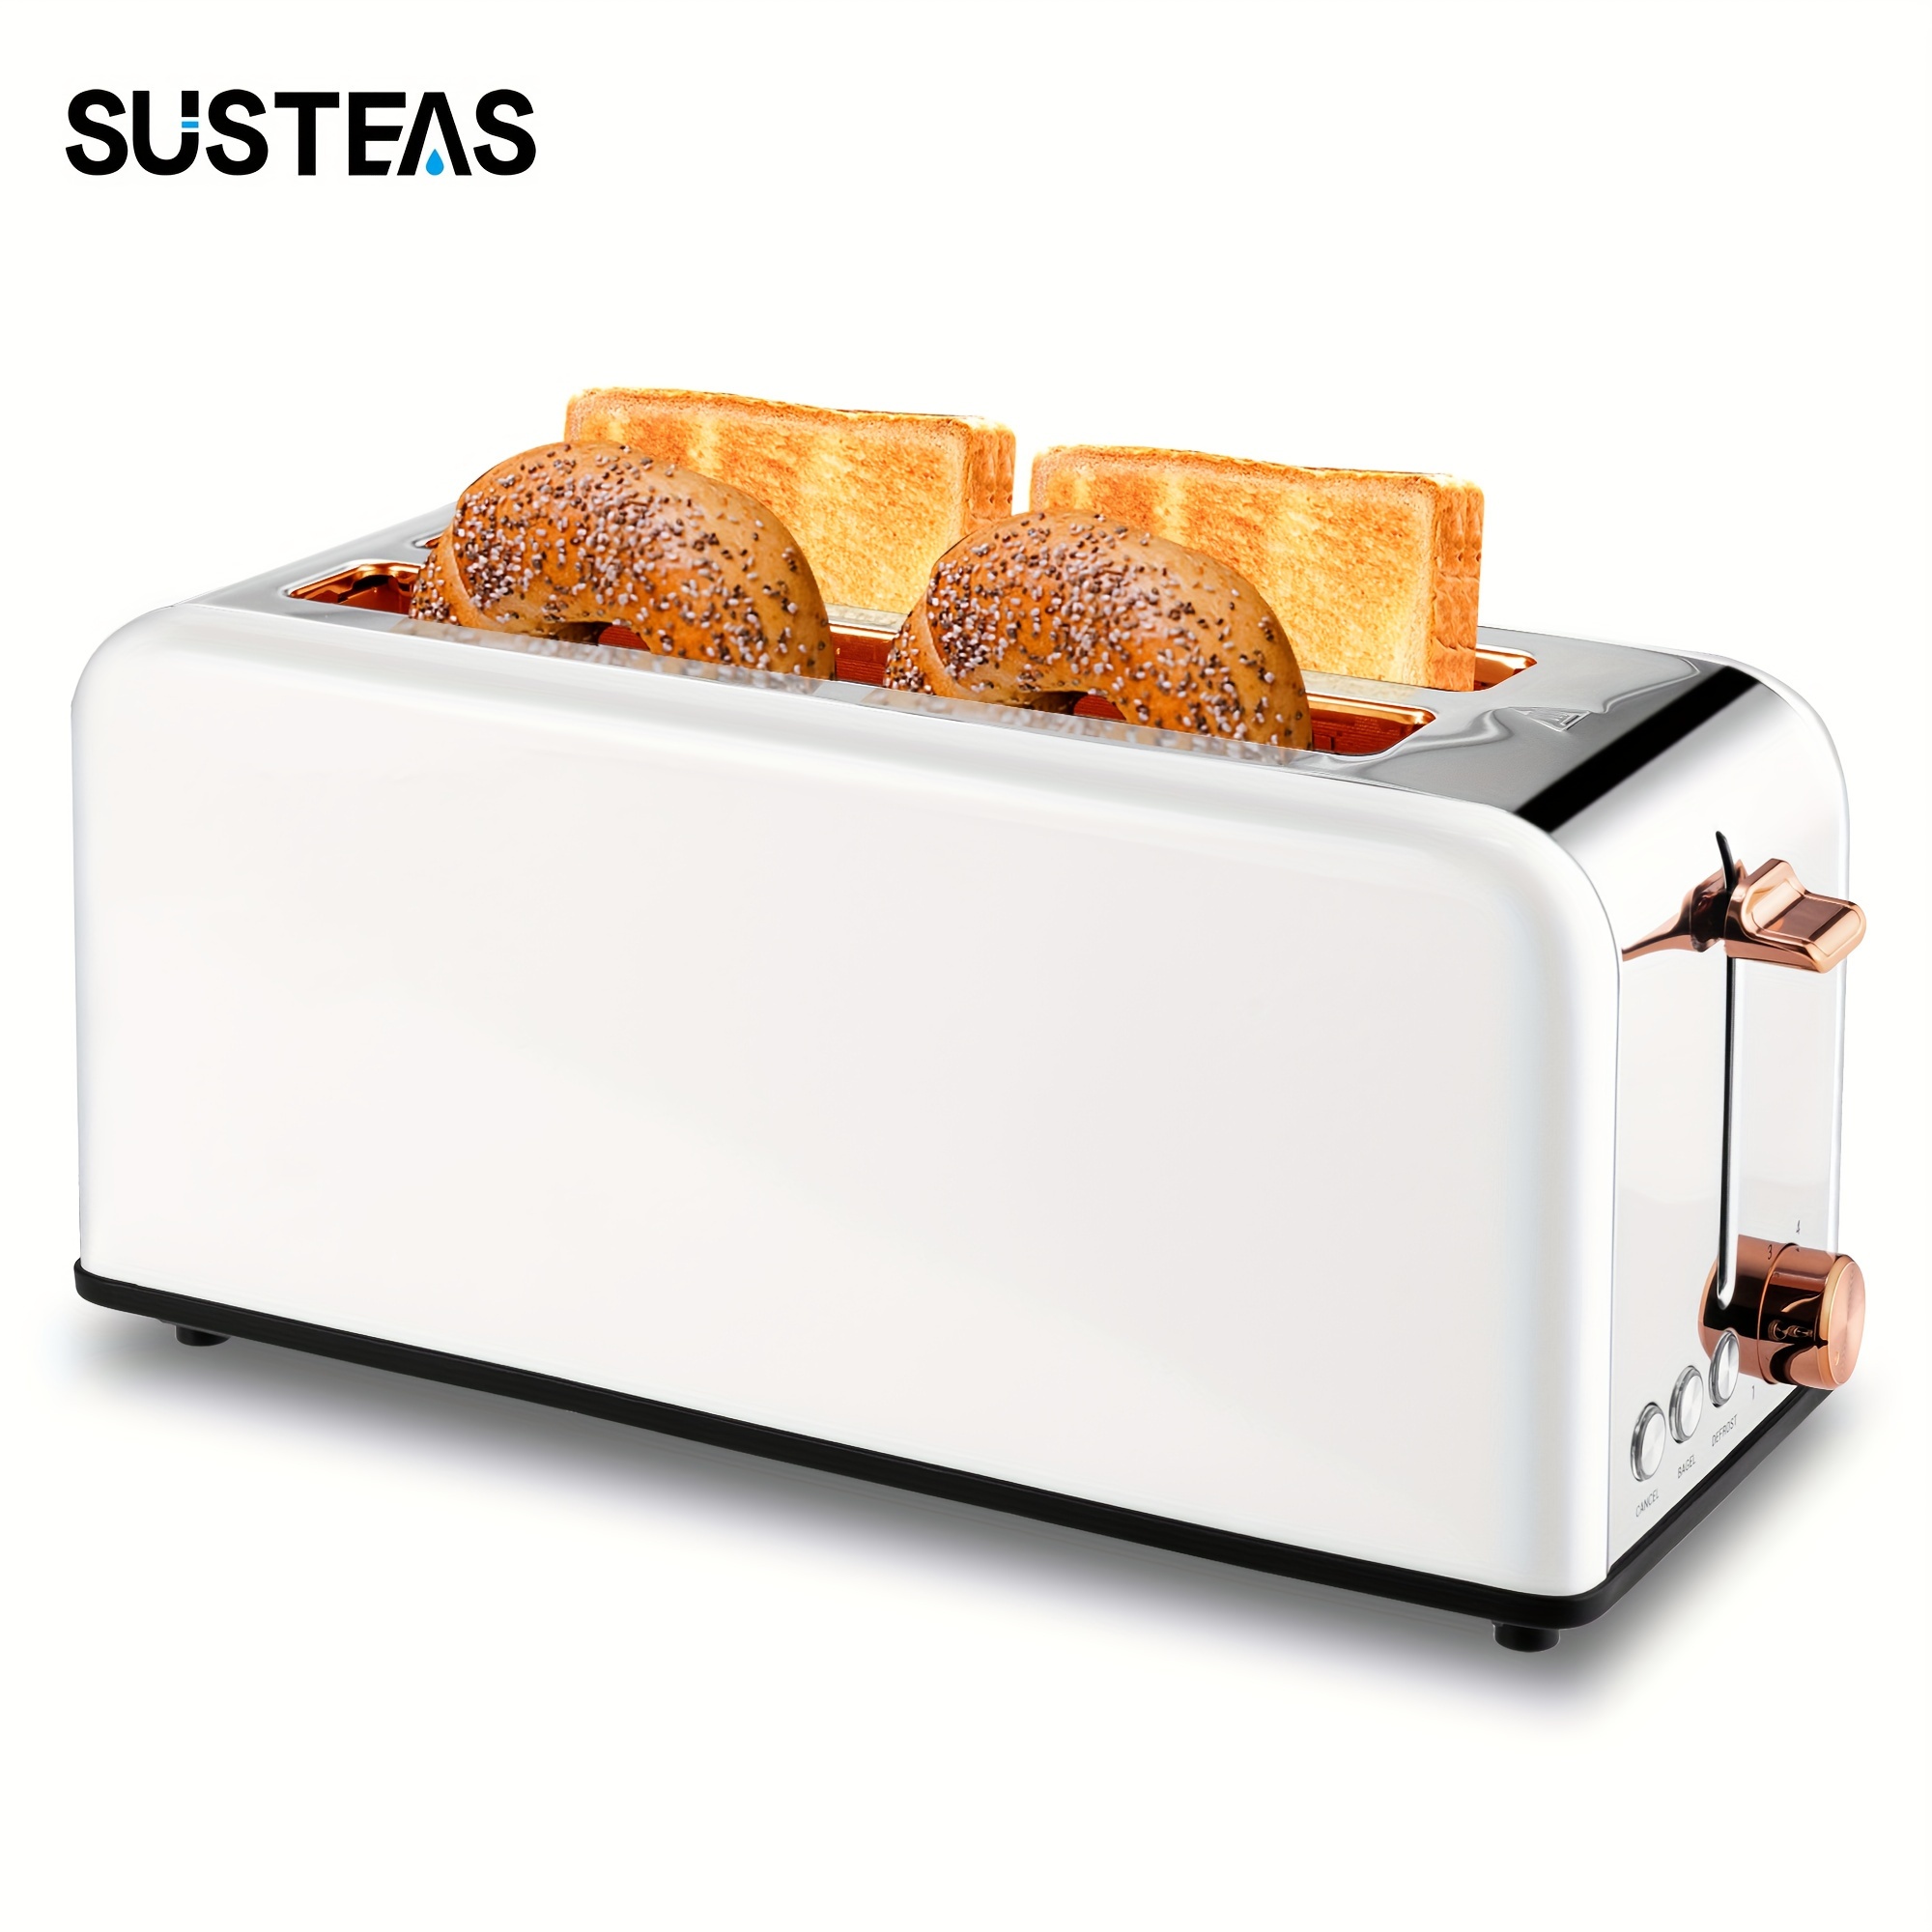 

Susteas Toaster 4 Slice With Wide Slots, 2 Long Slot Toaster For Bagels Waffles And Toast, 6 Levels, Stainless Steel, Removable Tray, Cancel/bagel/defrost Functions, Wt-8500 White (1500w)